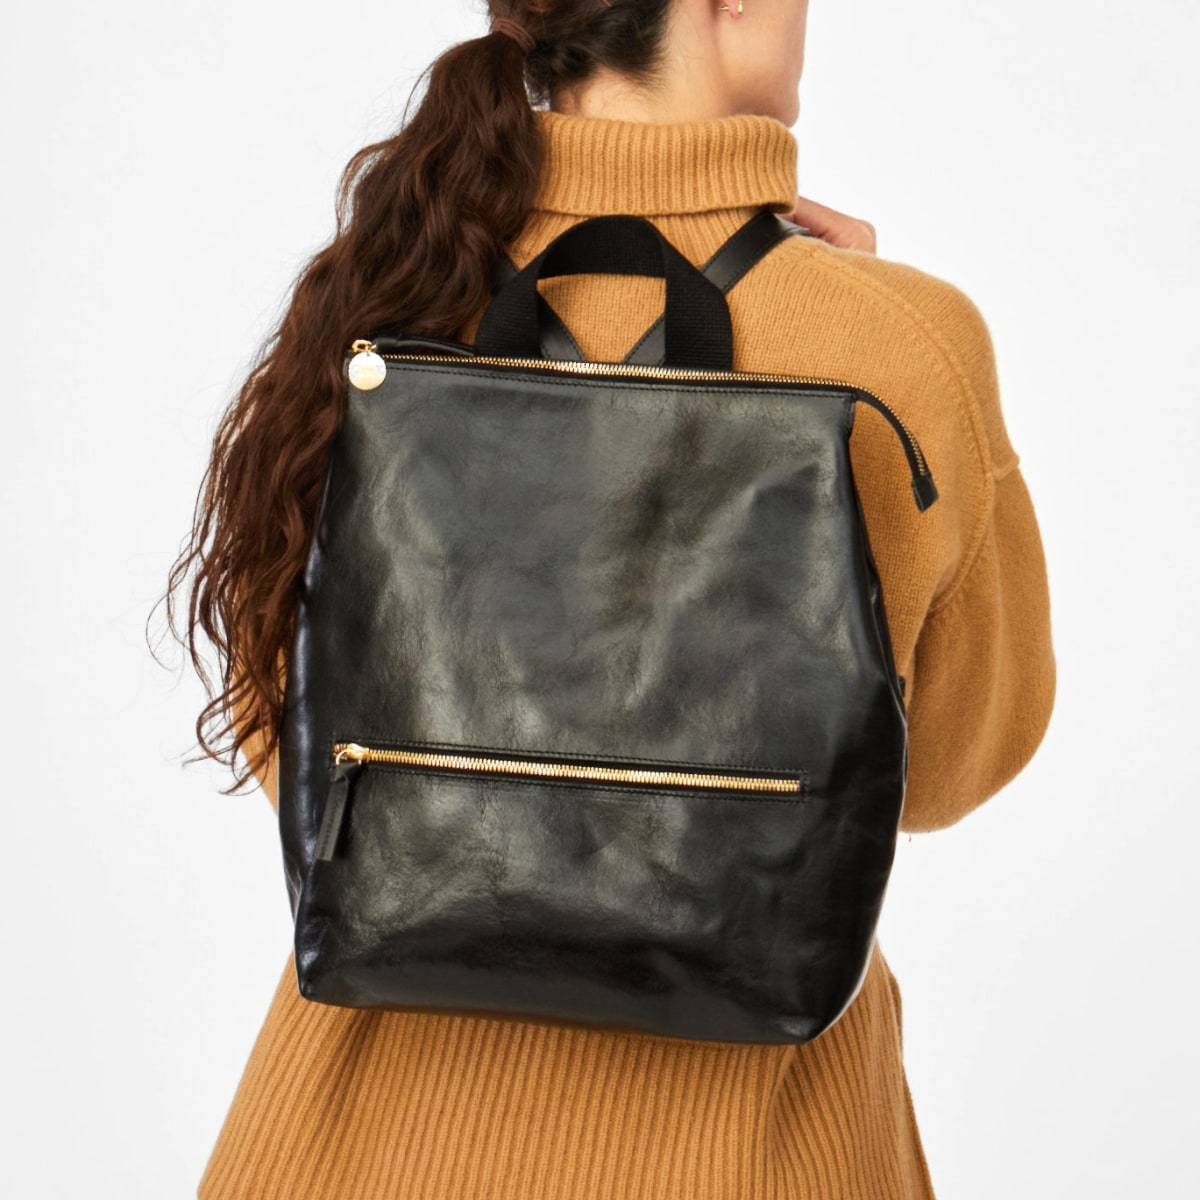 Cuyana's System Tote is the best work bag for a hybrid life